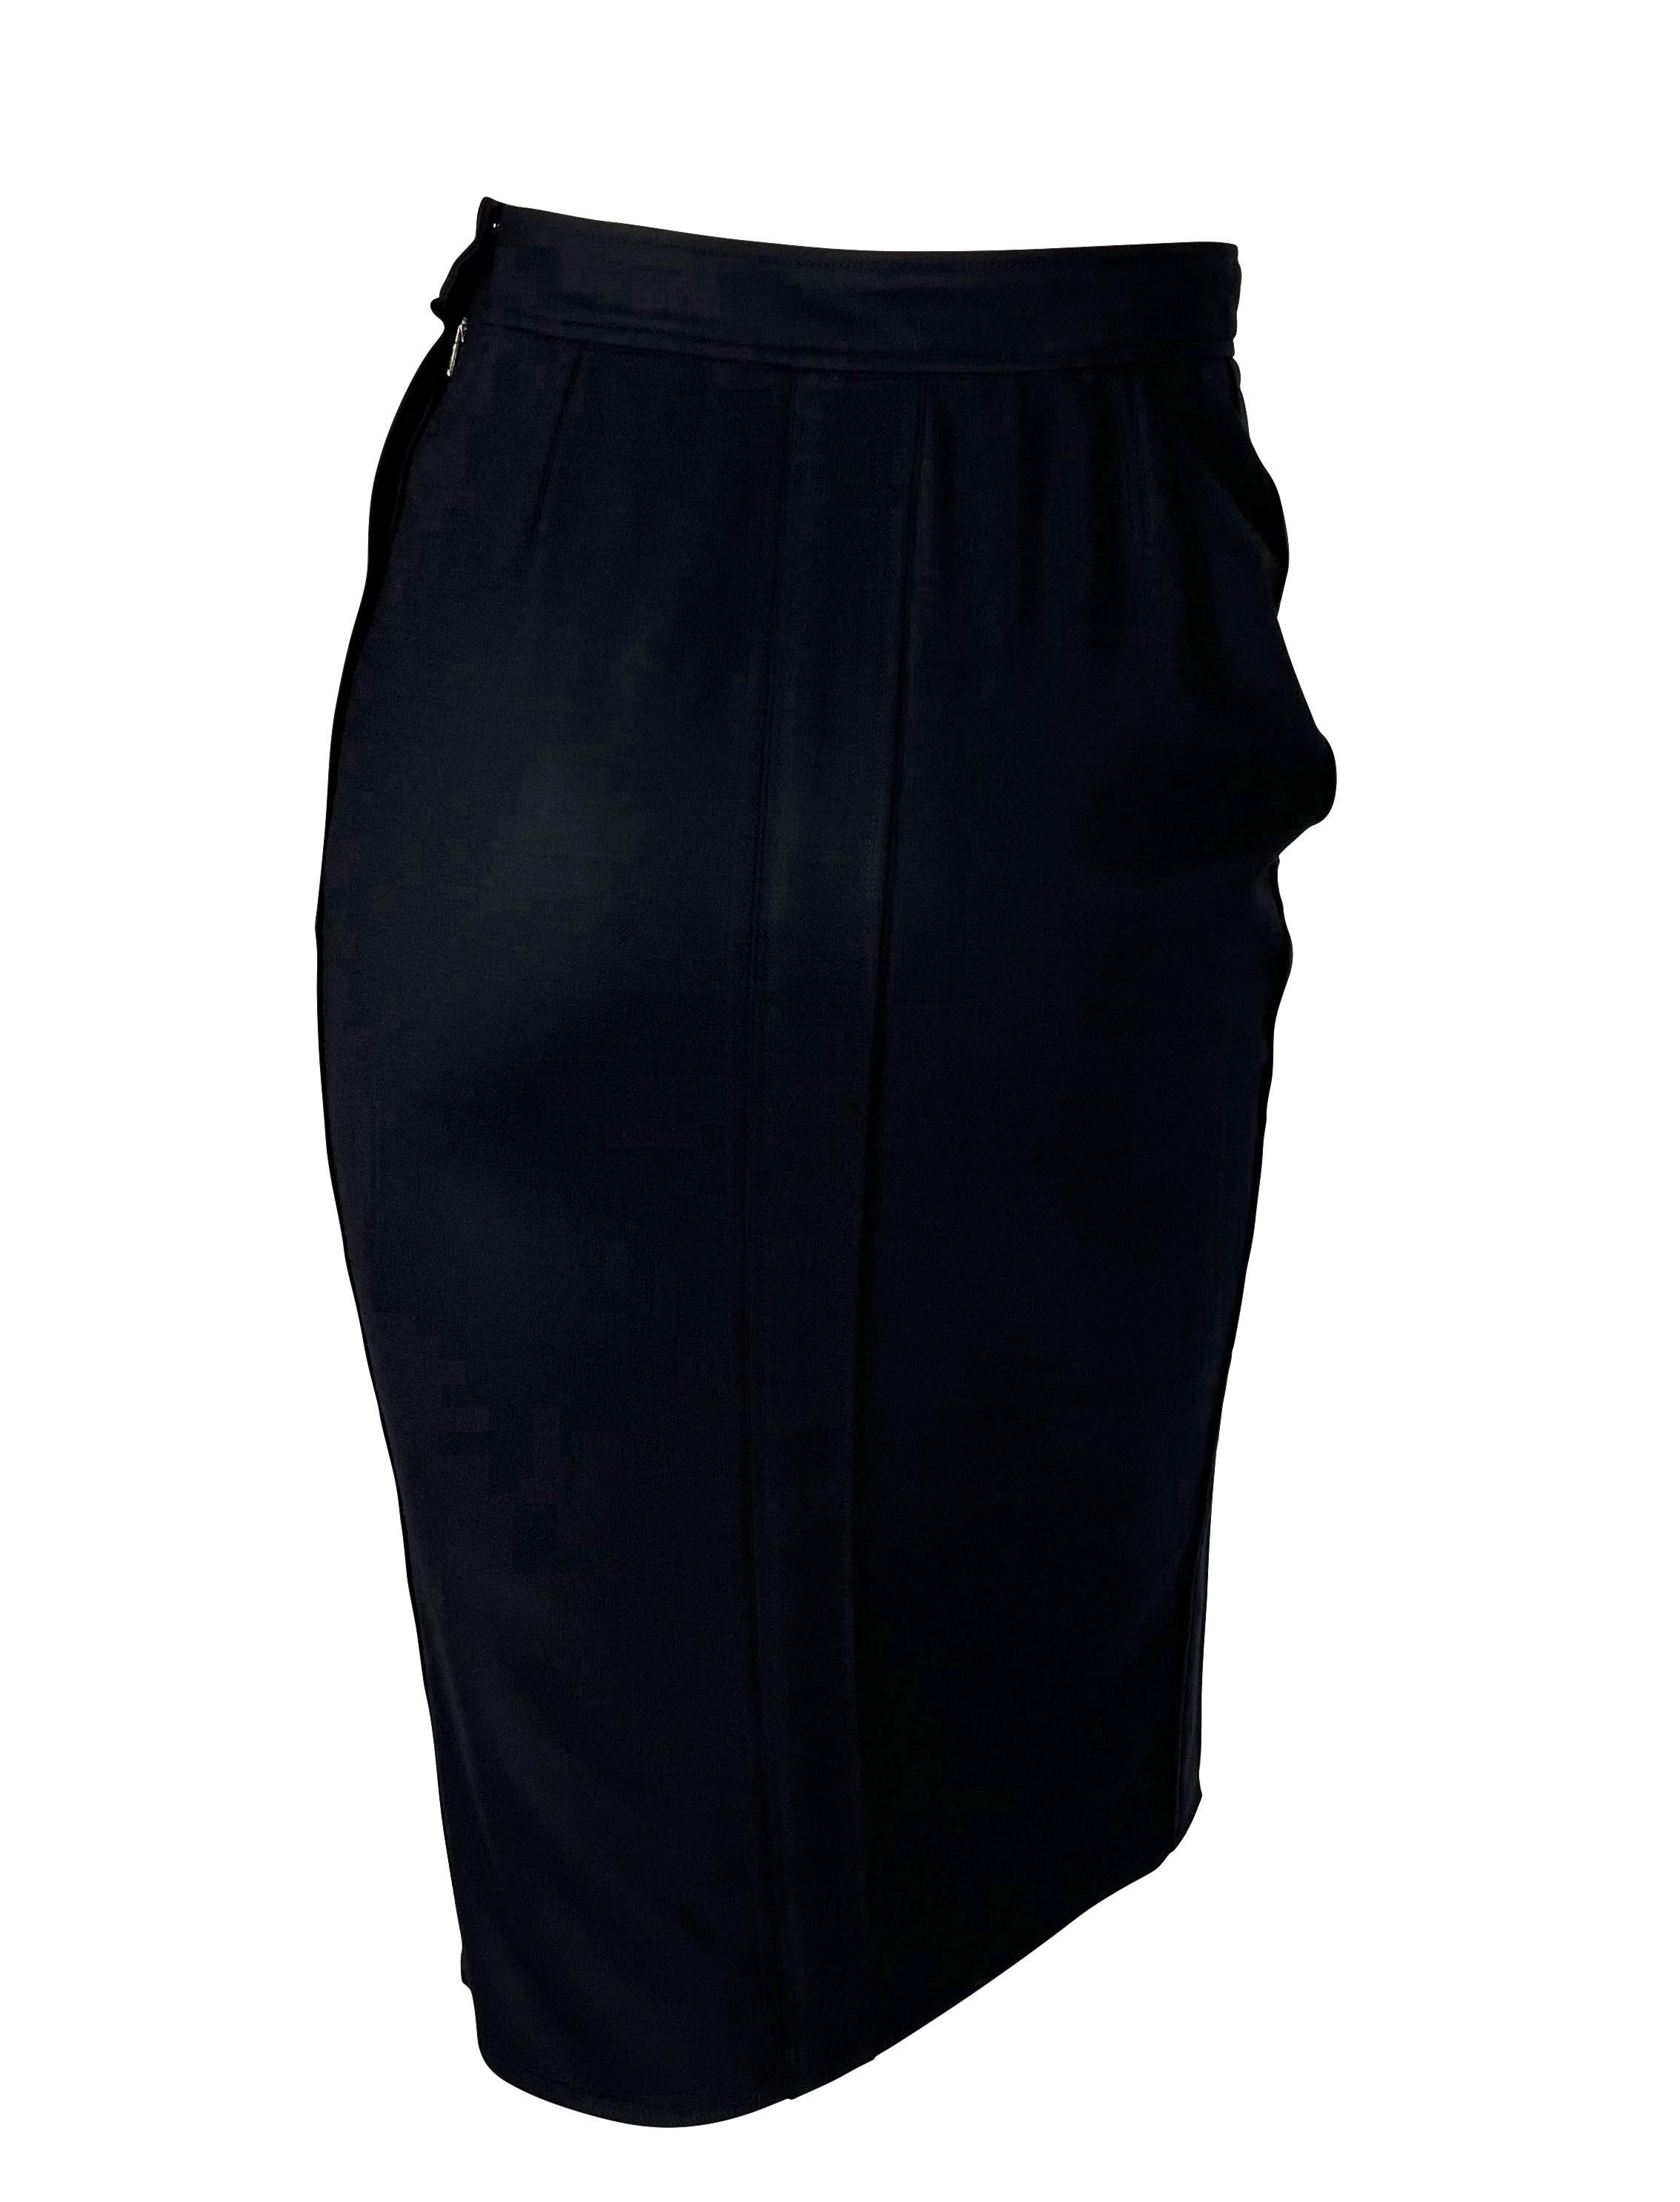 2000s Yves Saint Laurent by Tom Ford Black Faux-Wrap Pencil Stretch Wool Skirt  In Excellent Condition For Sale In West Hollywood, CA